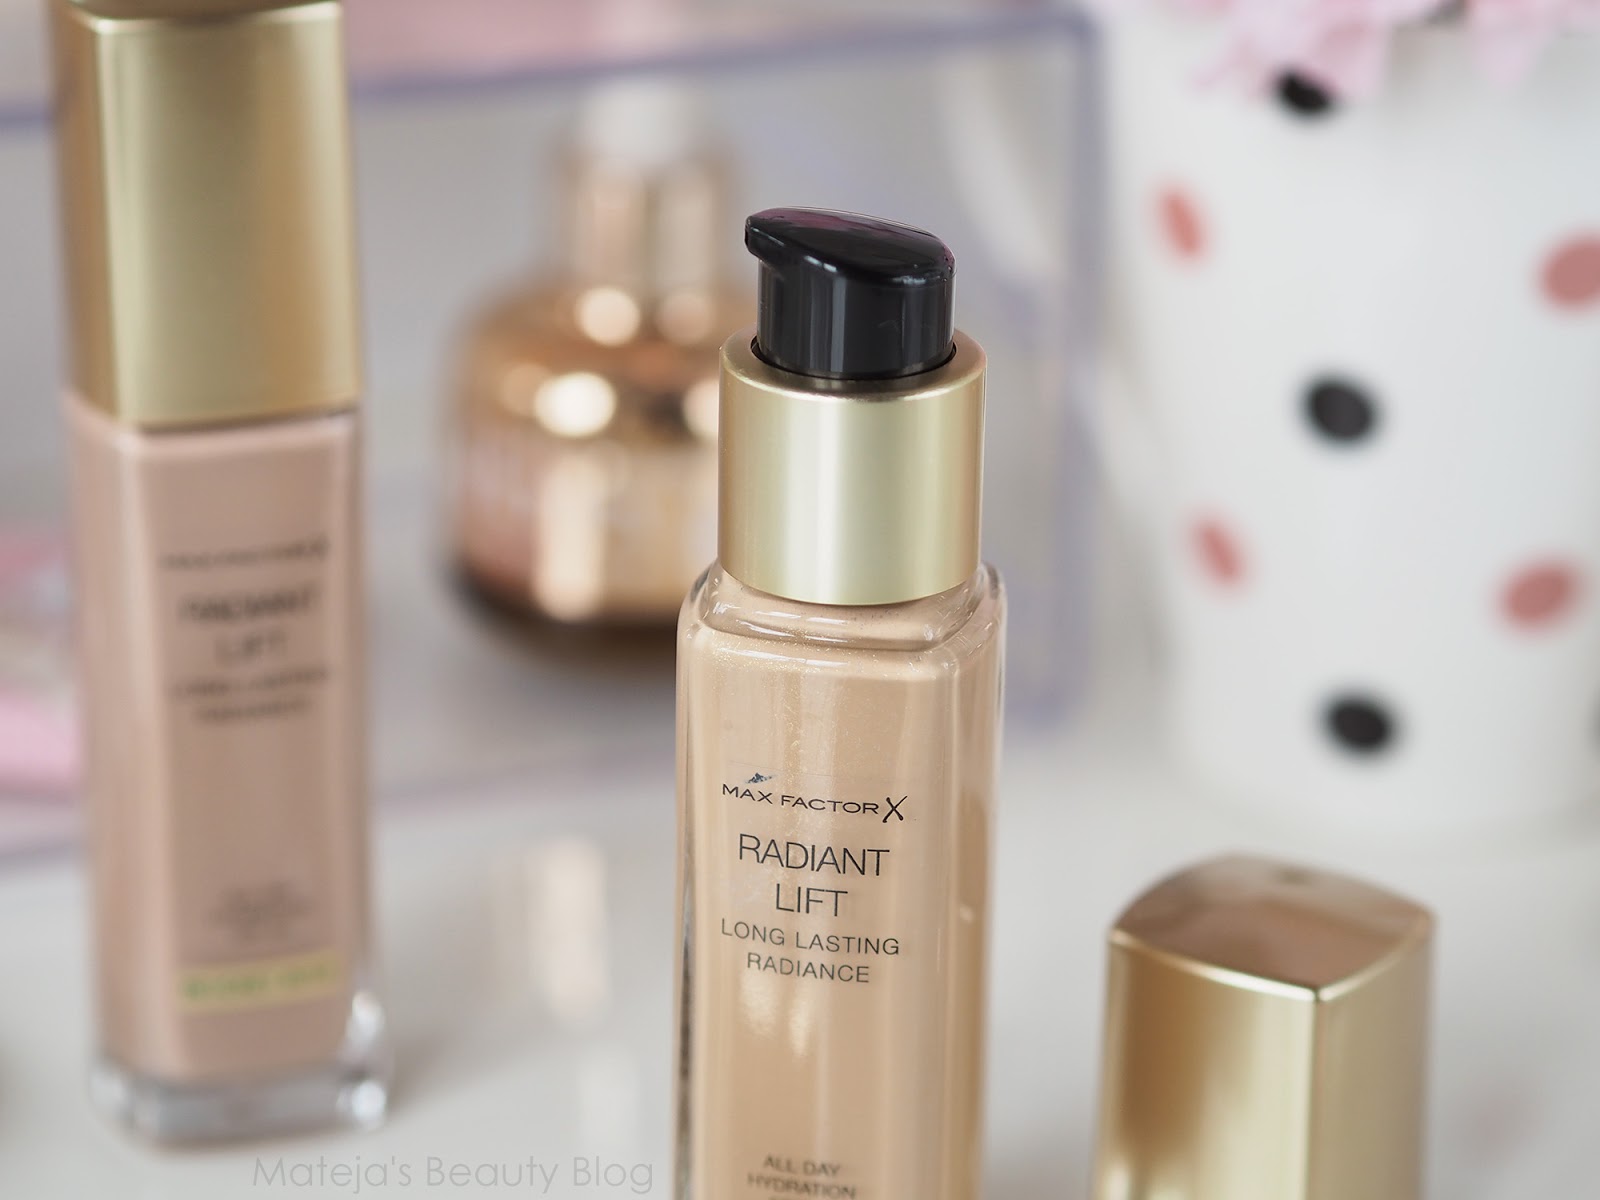 Oceania mouse Reserve Max Factor Radiant Lift Foundation - Mateja's Beauty Blog